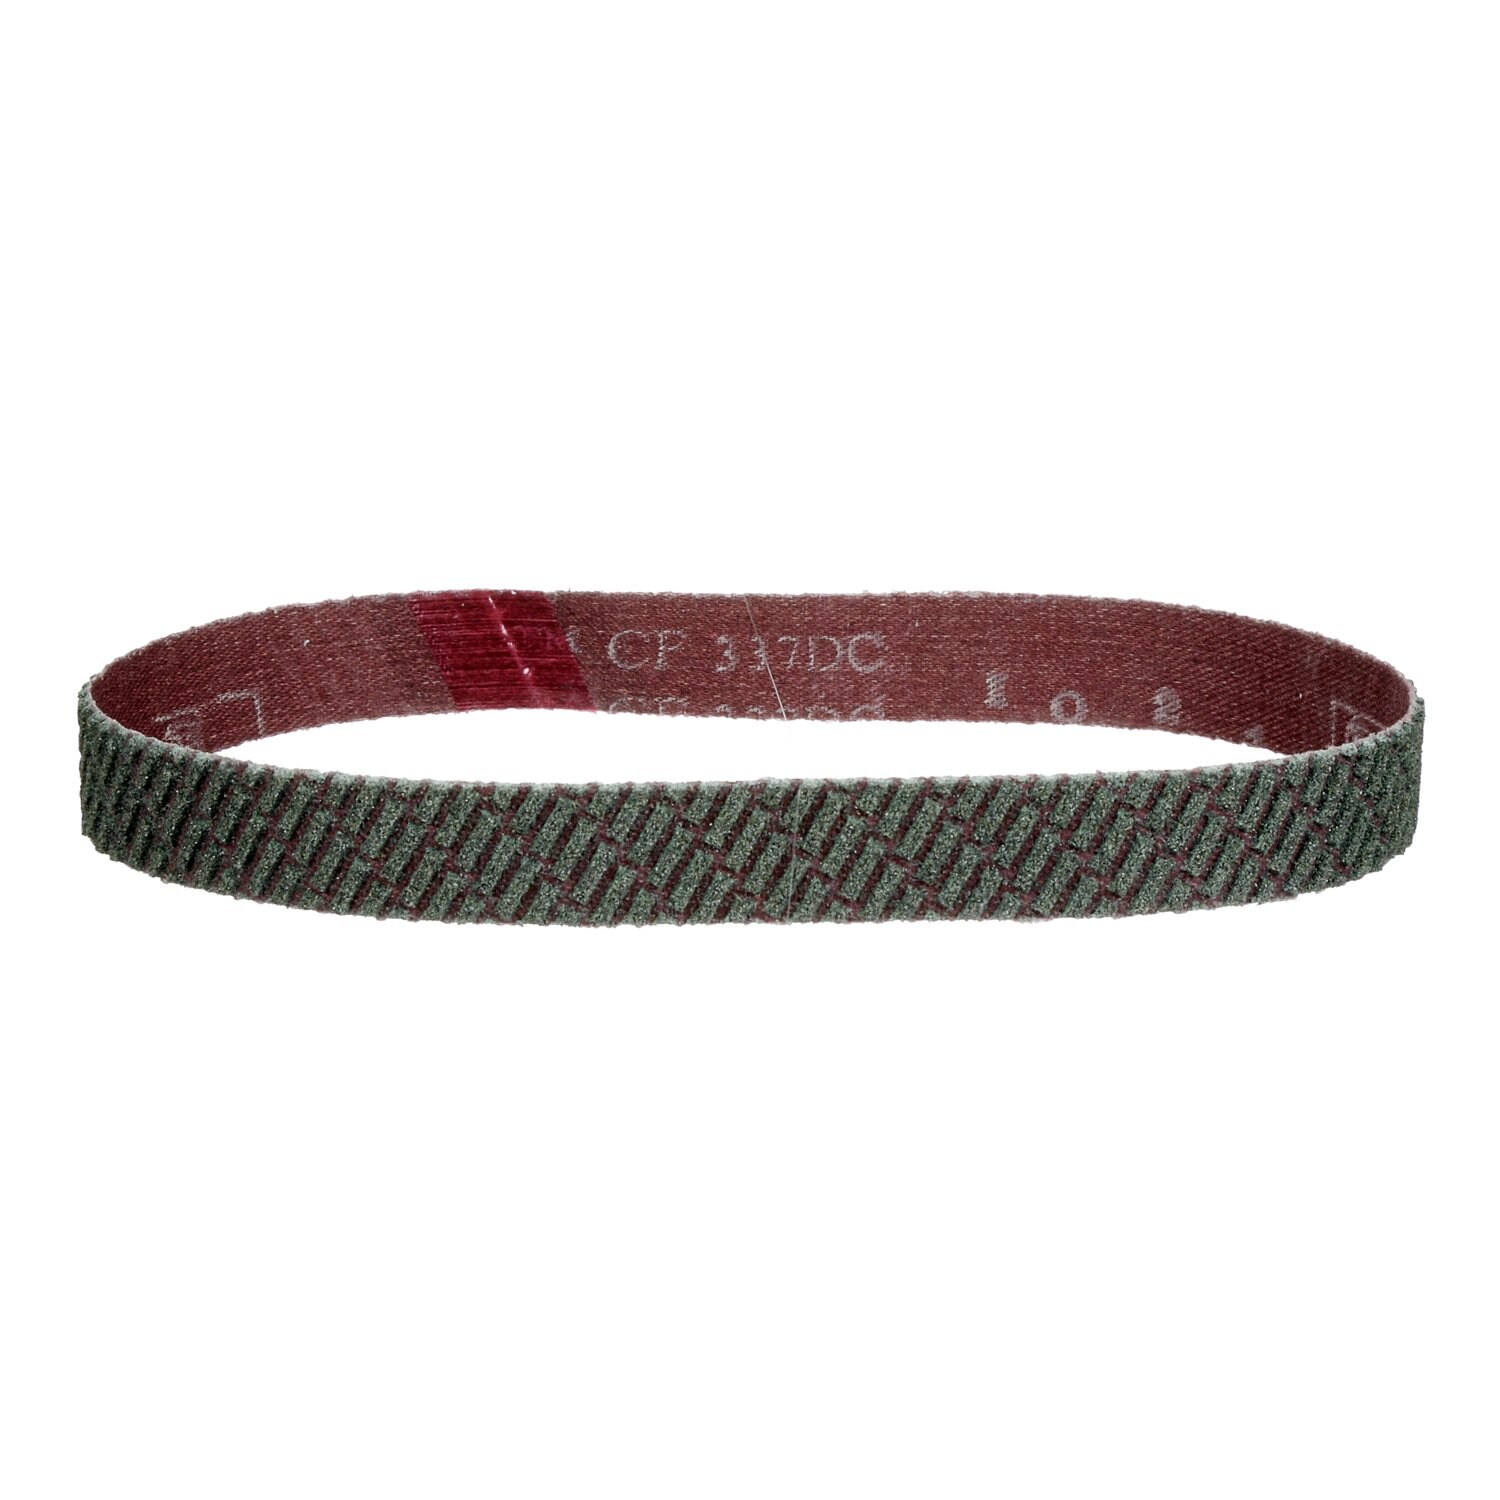 7010290180 - 3M Trizact Cloth Belt 337DC, 1/2 in X 24 in A45 X-weight, 20 ea/Case